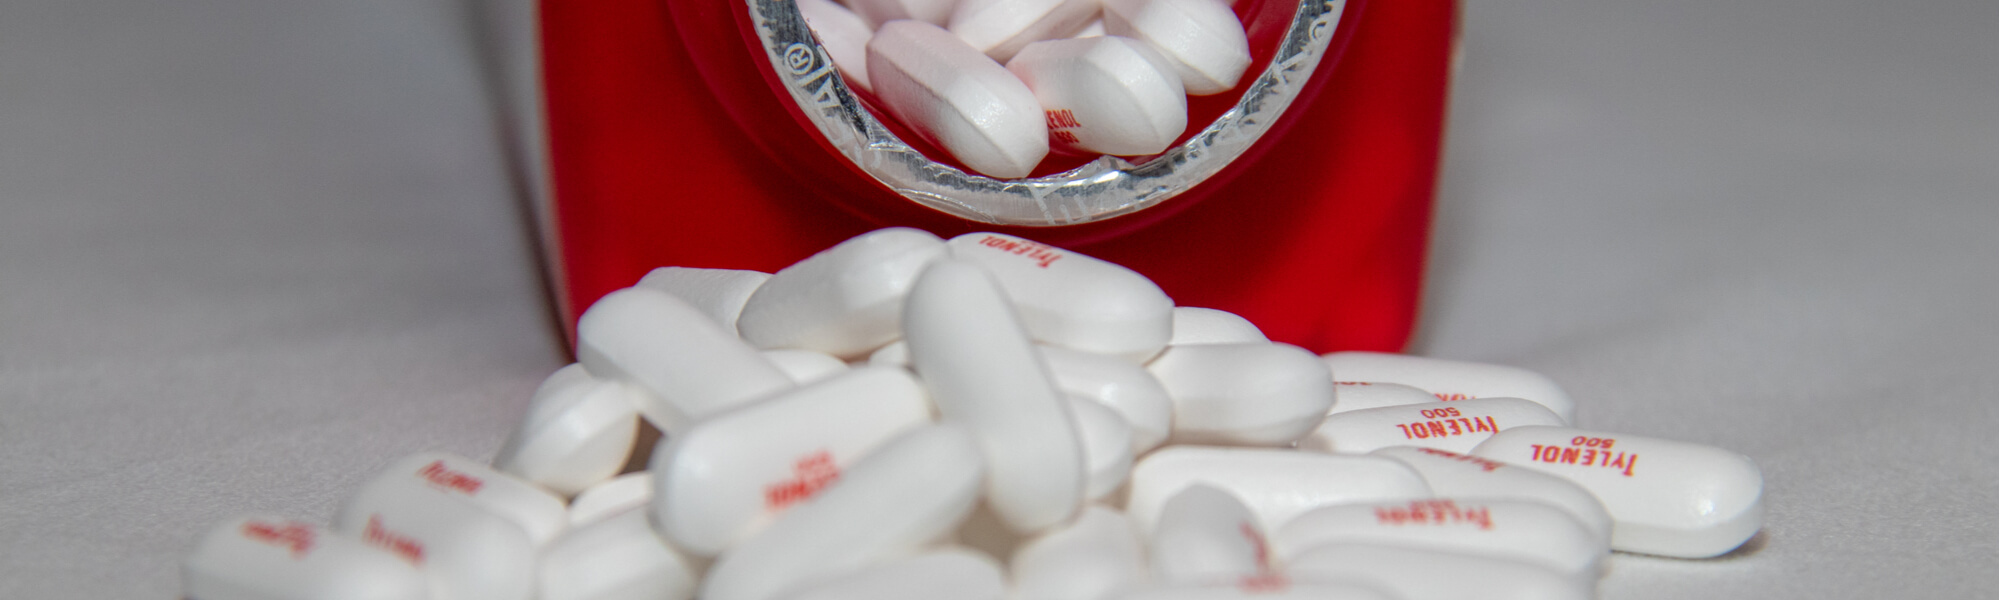 Does Tylenol Cause Constipation? Find Out Here